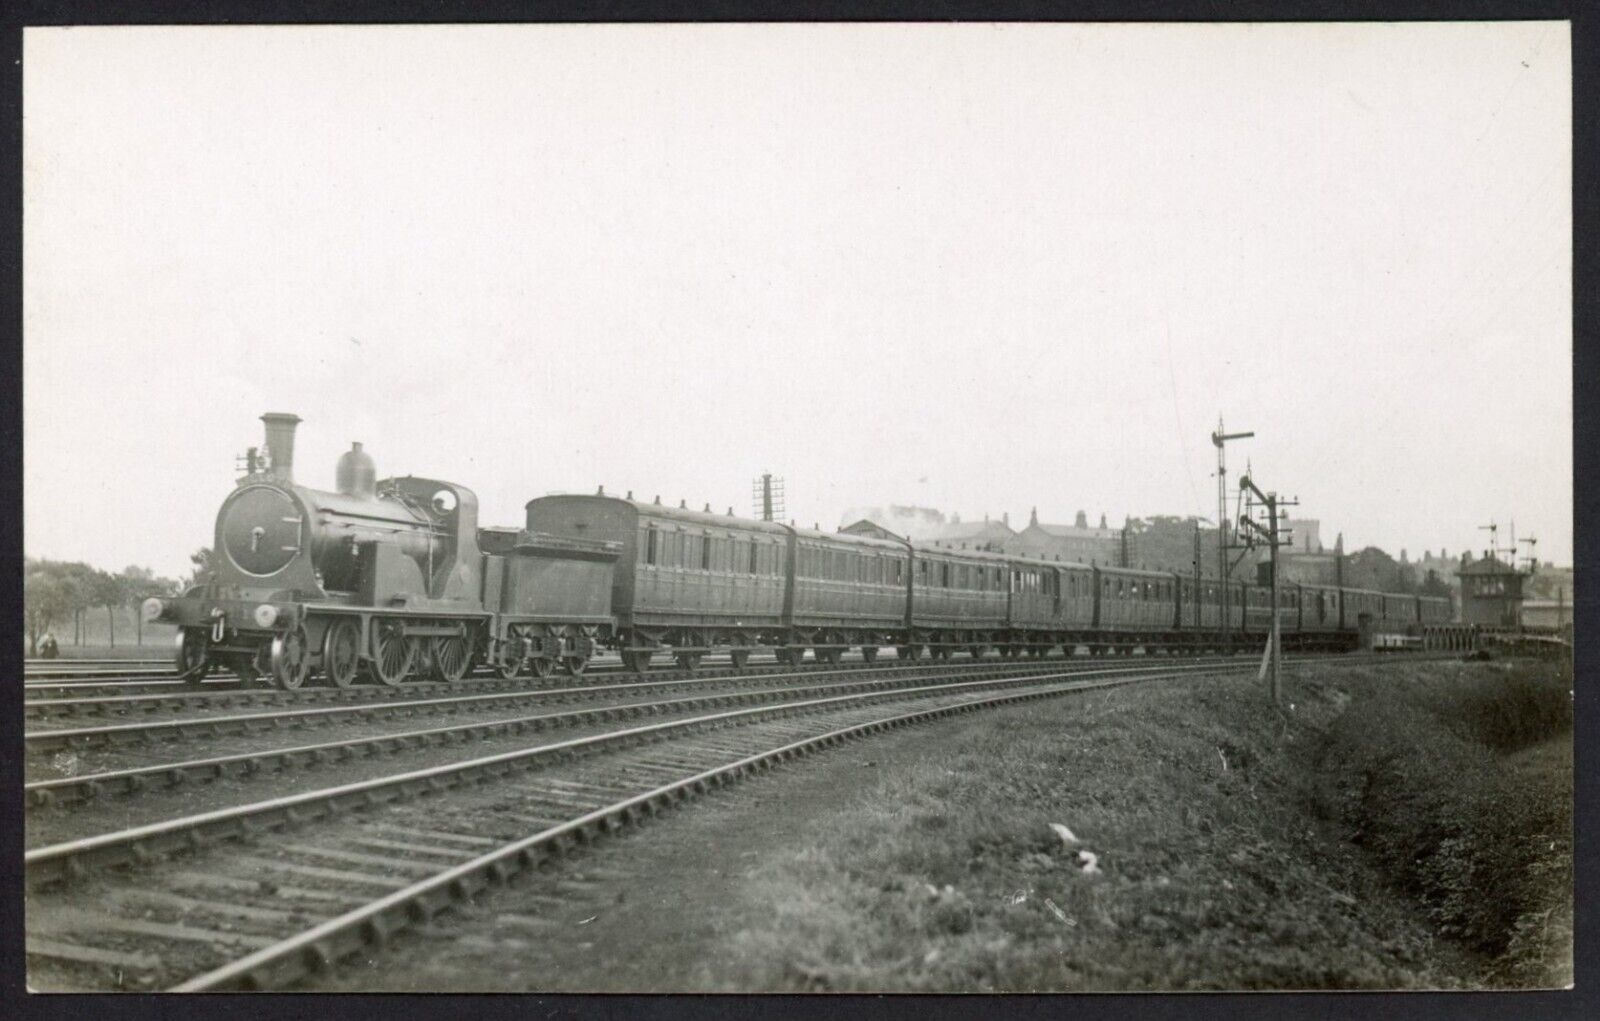 House Clearance - Railway RP service NBR 4-4-0 No. 1 at Port Carlisle with Silloth train